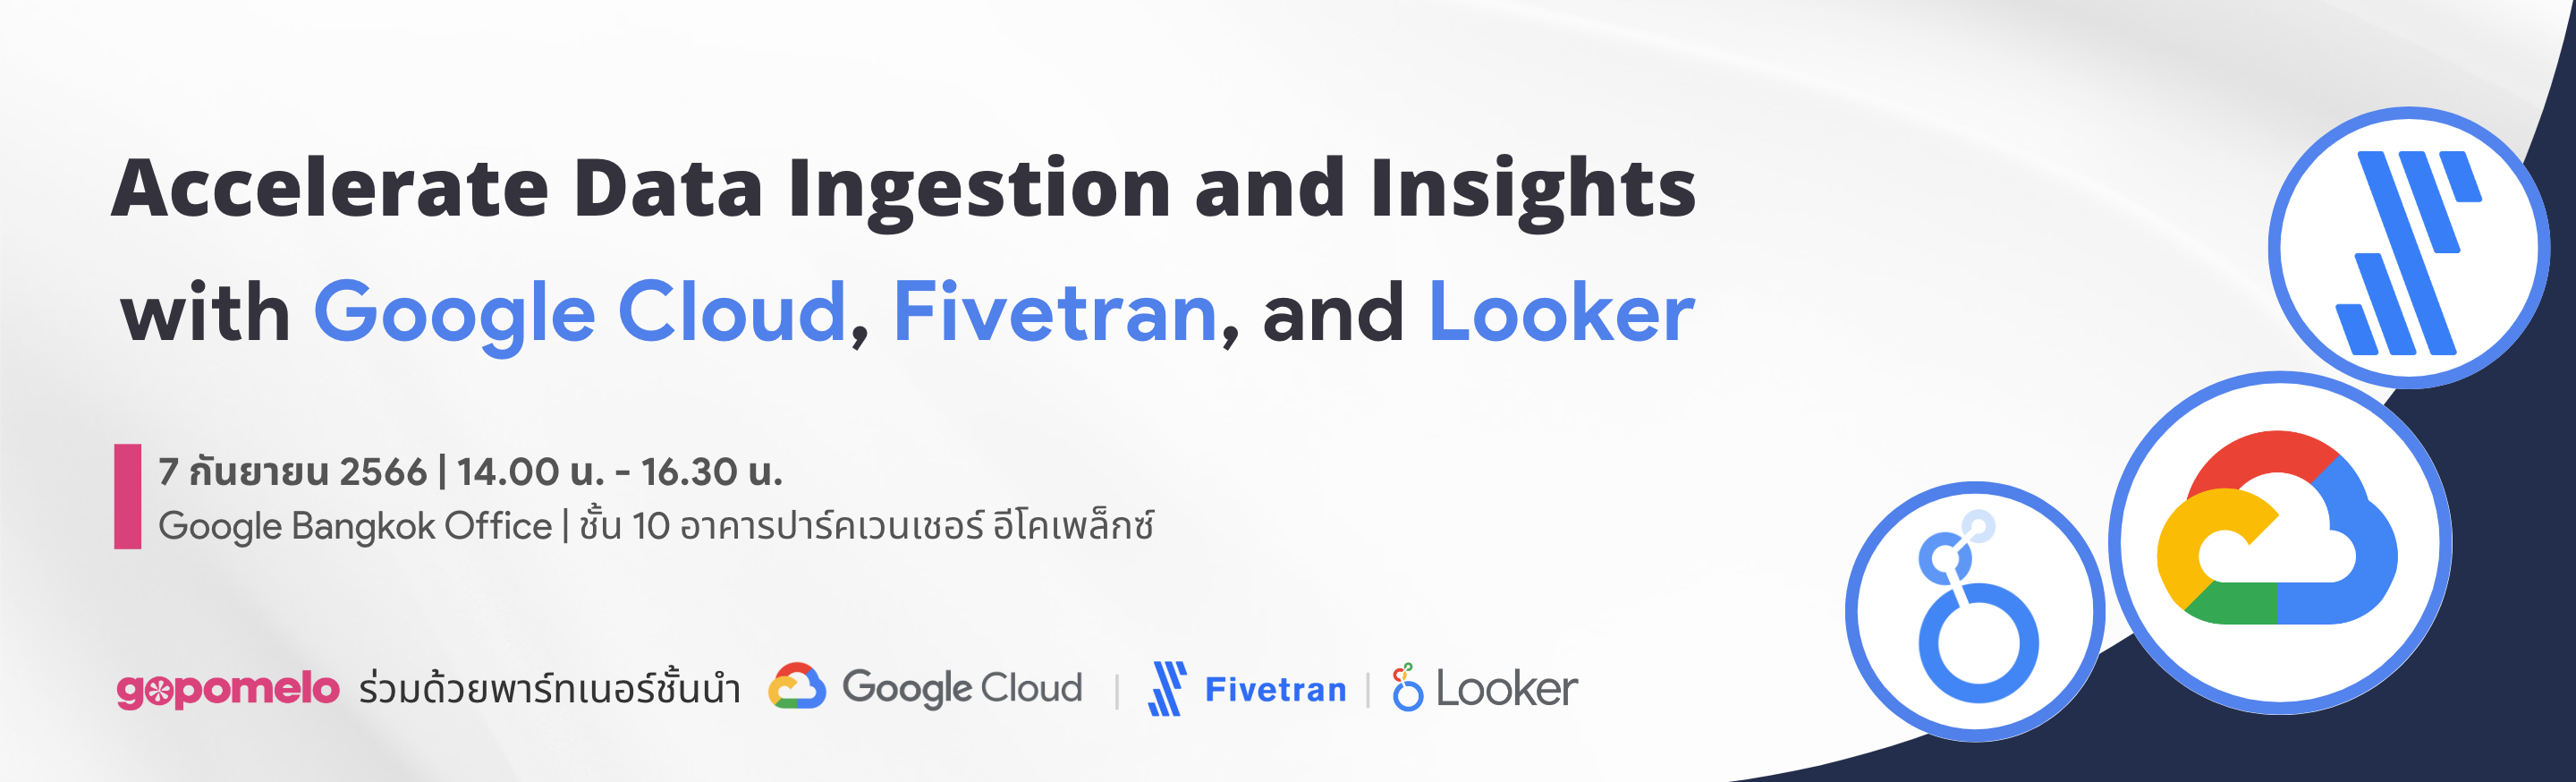 Accelerate data ingestion and insights with GCP, Fivetran, and Looker